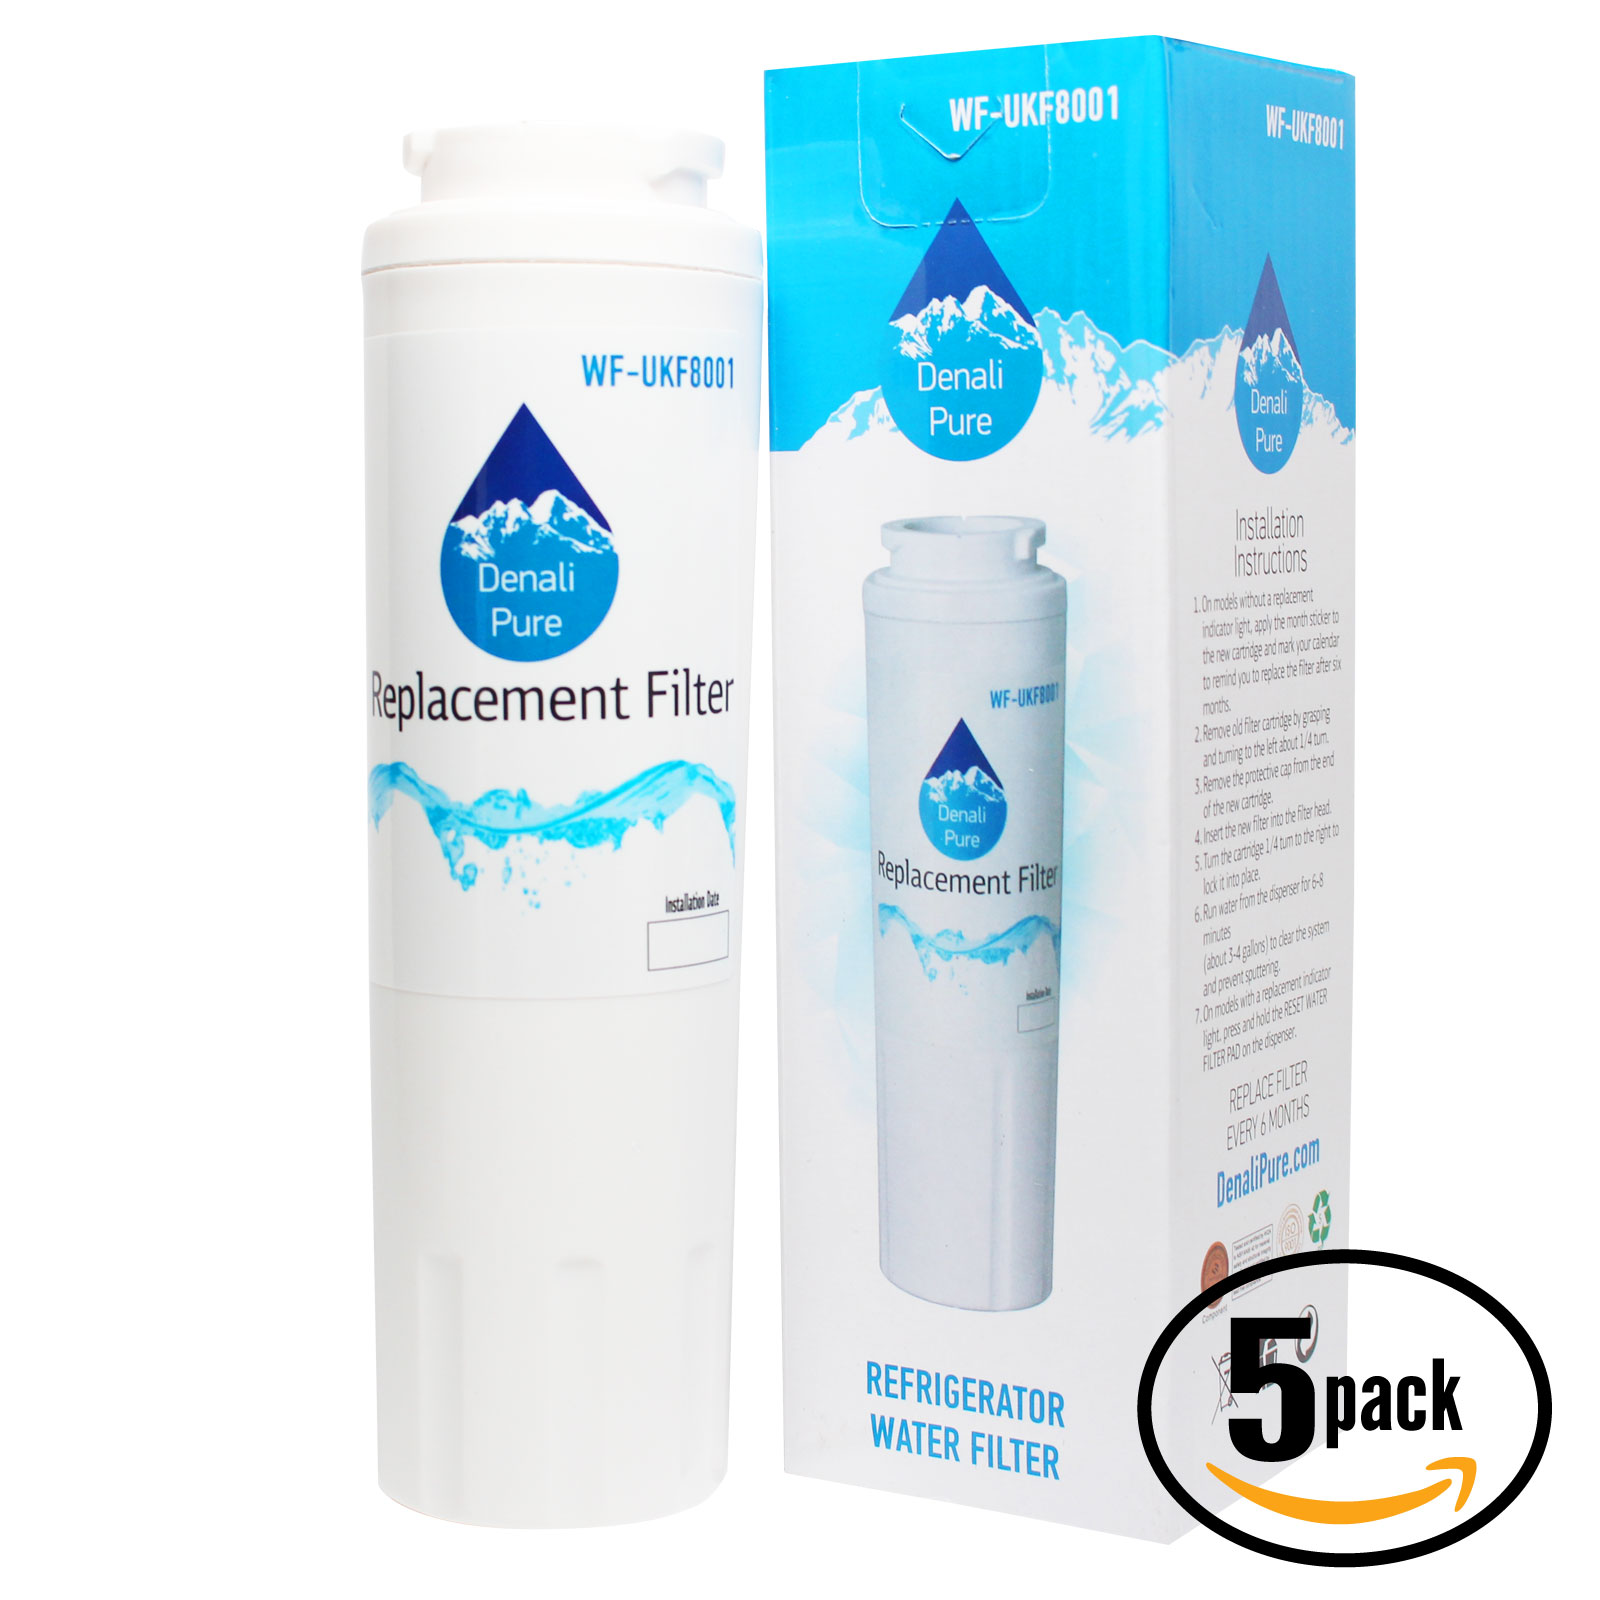 5-Pack Replacement for KitchenAid KFXS25RYMS0 Refrigerator Water Filter - Compatible with KitchenAid 4396395 Fridge Water Filter Cartridge - image 1 of 4